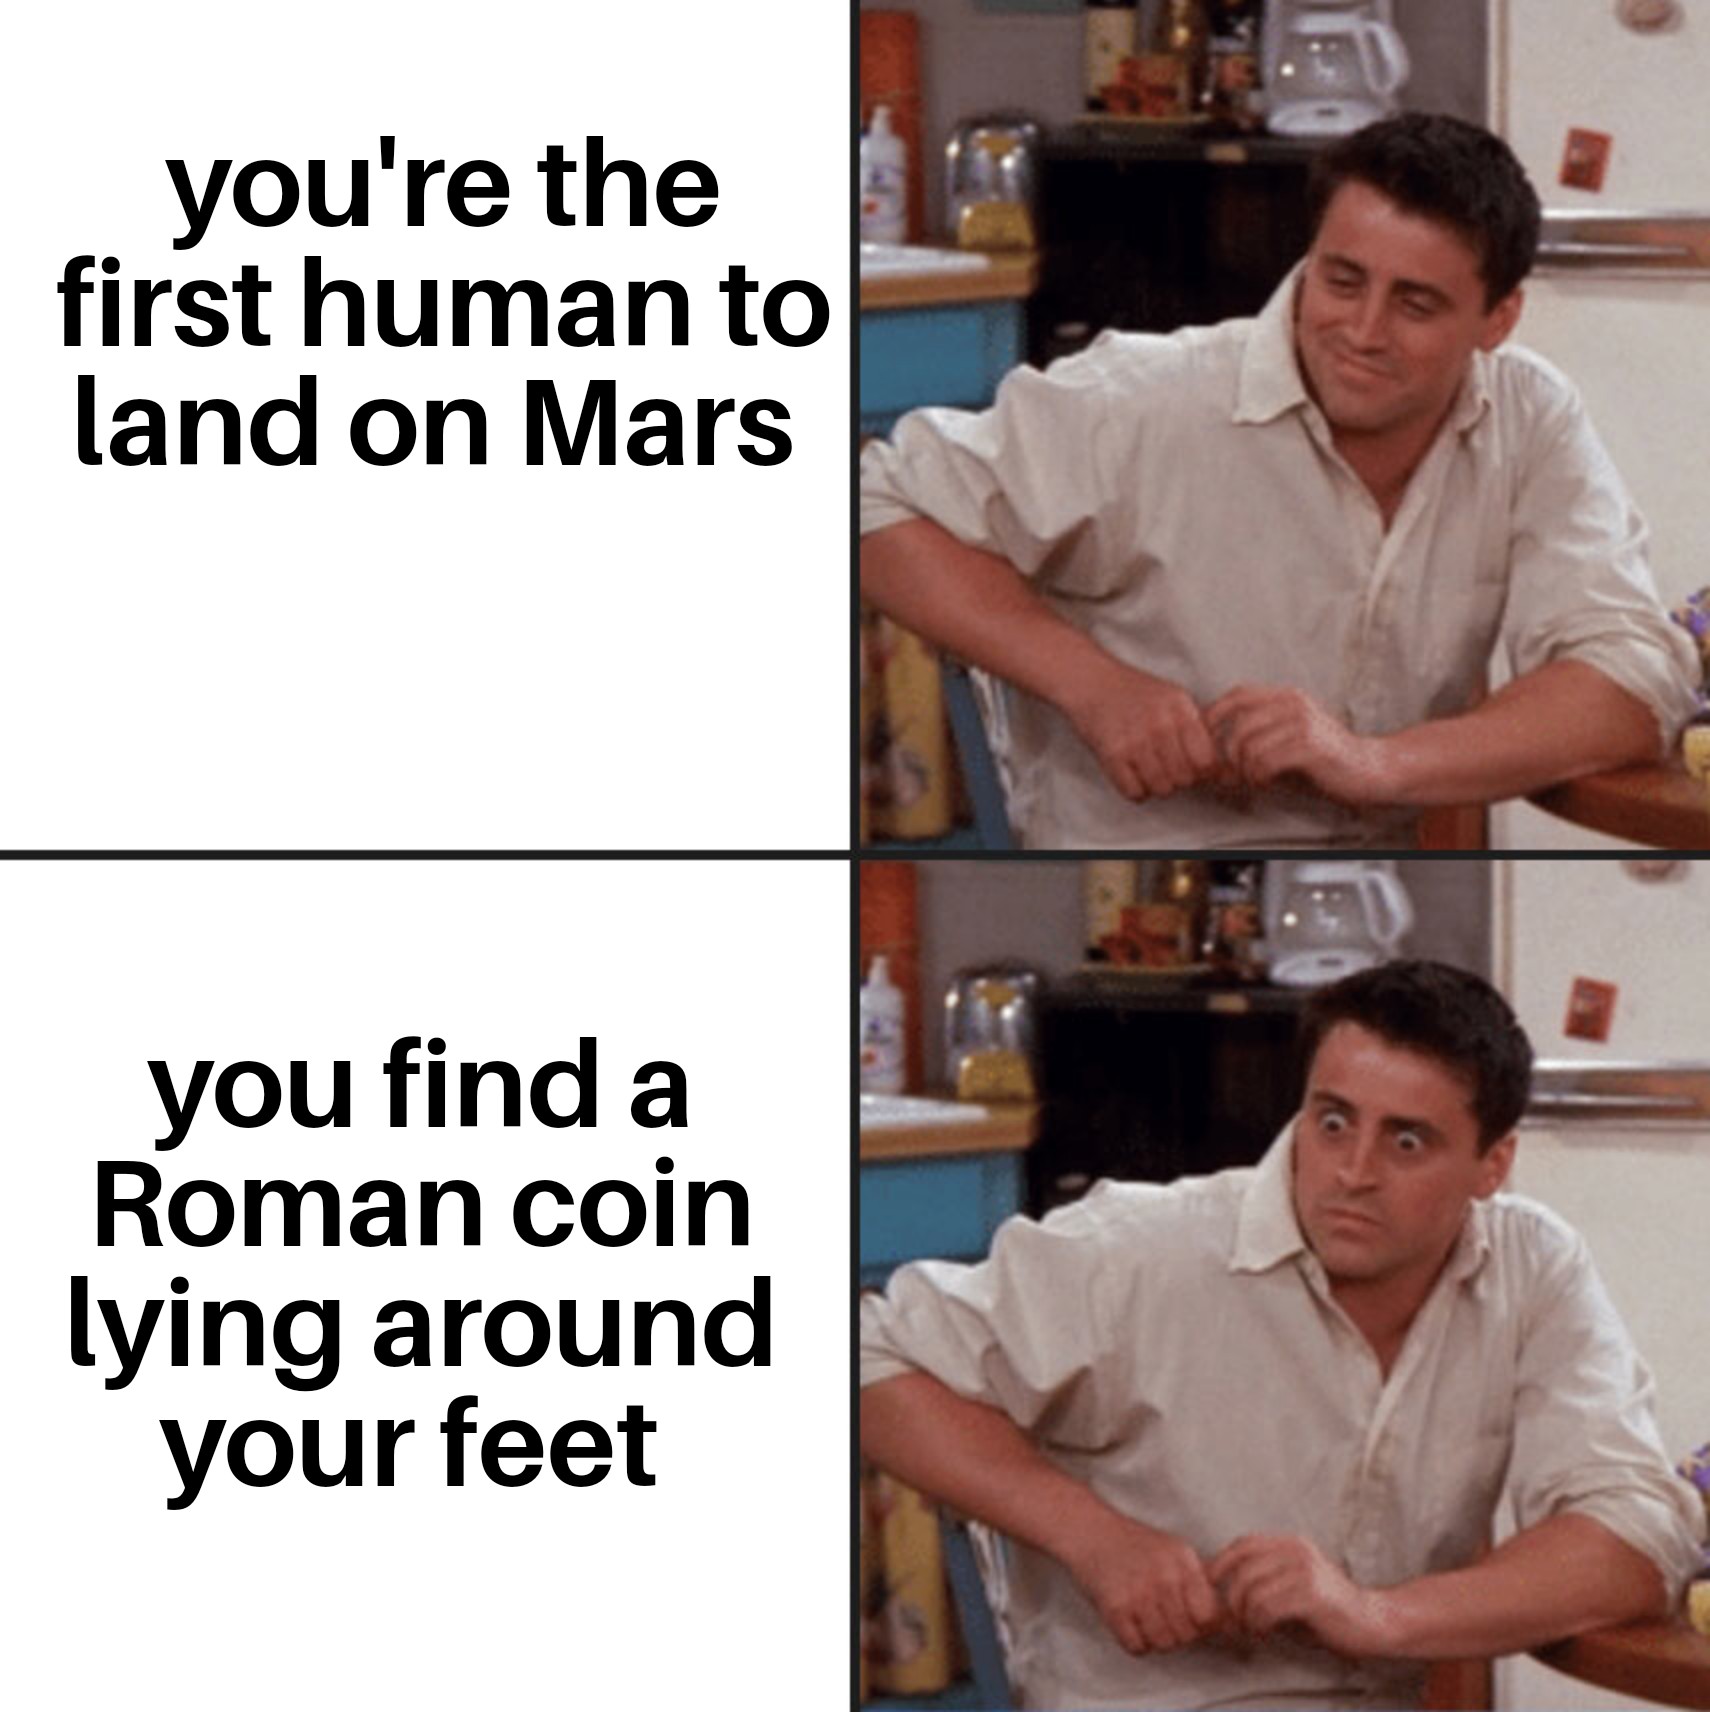 dank memes - funny adhd memes - you're the first human to land on Mars you find a Roman coin lying around your feet